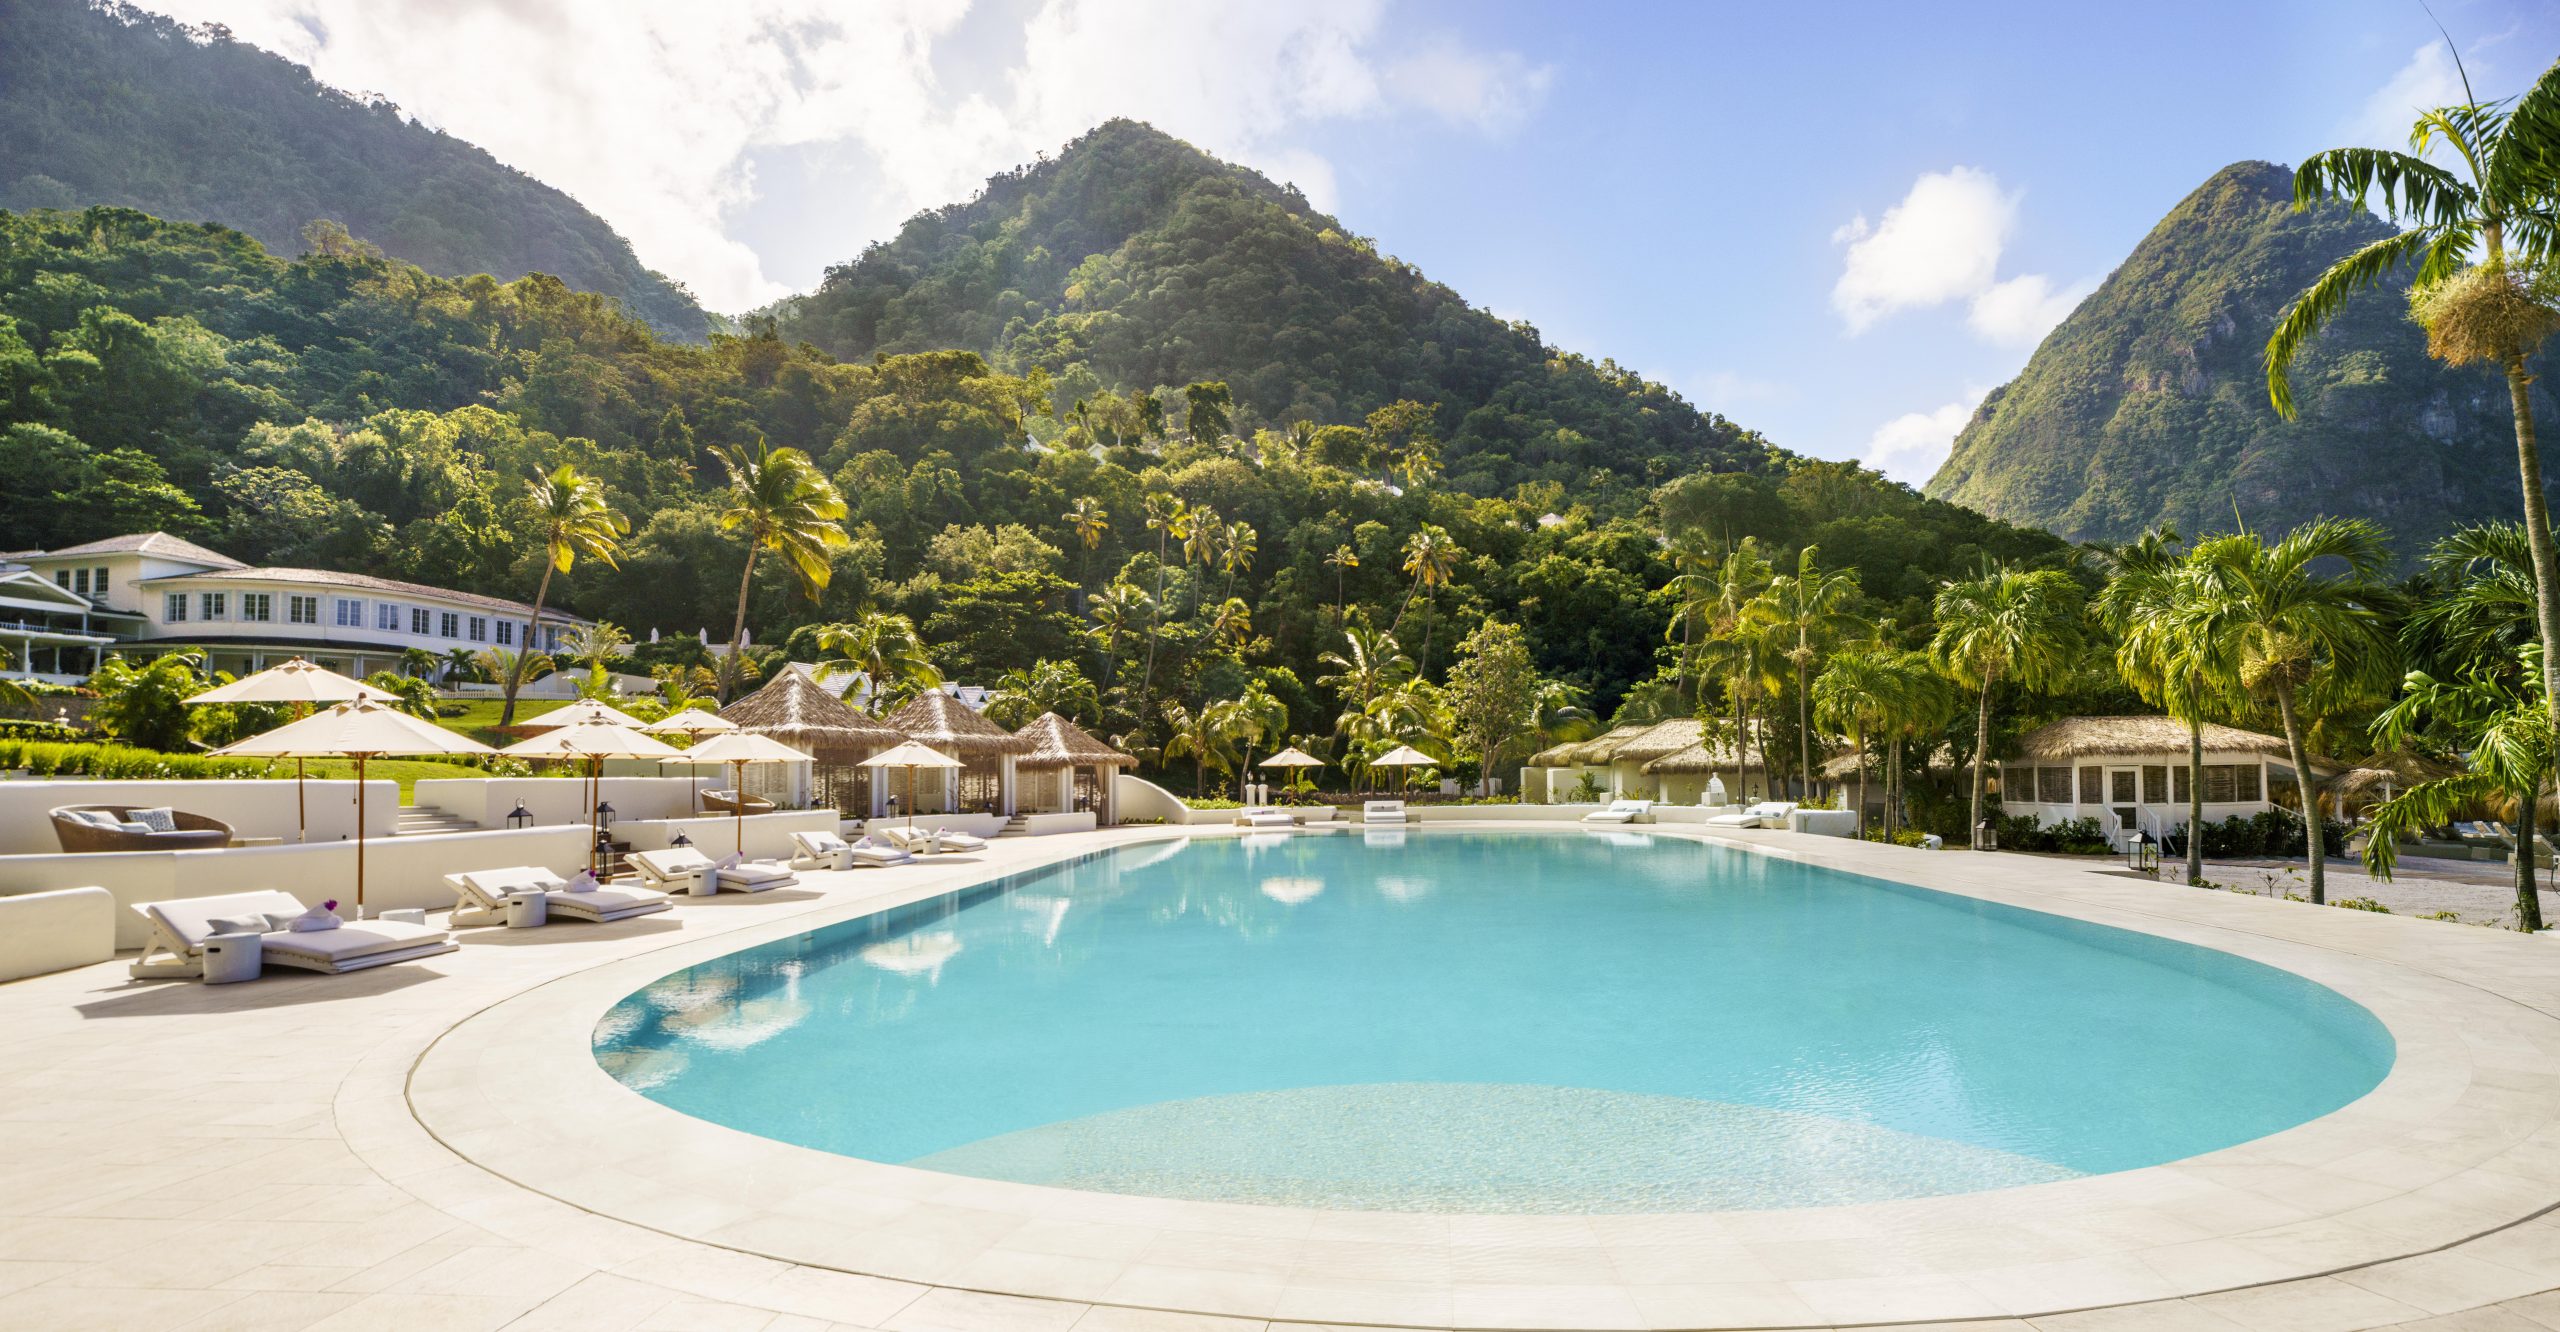 Views of the pitons and of the resort’s beautiful landscape built up the mountain make the pool experience special.